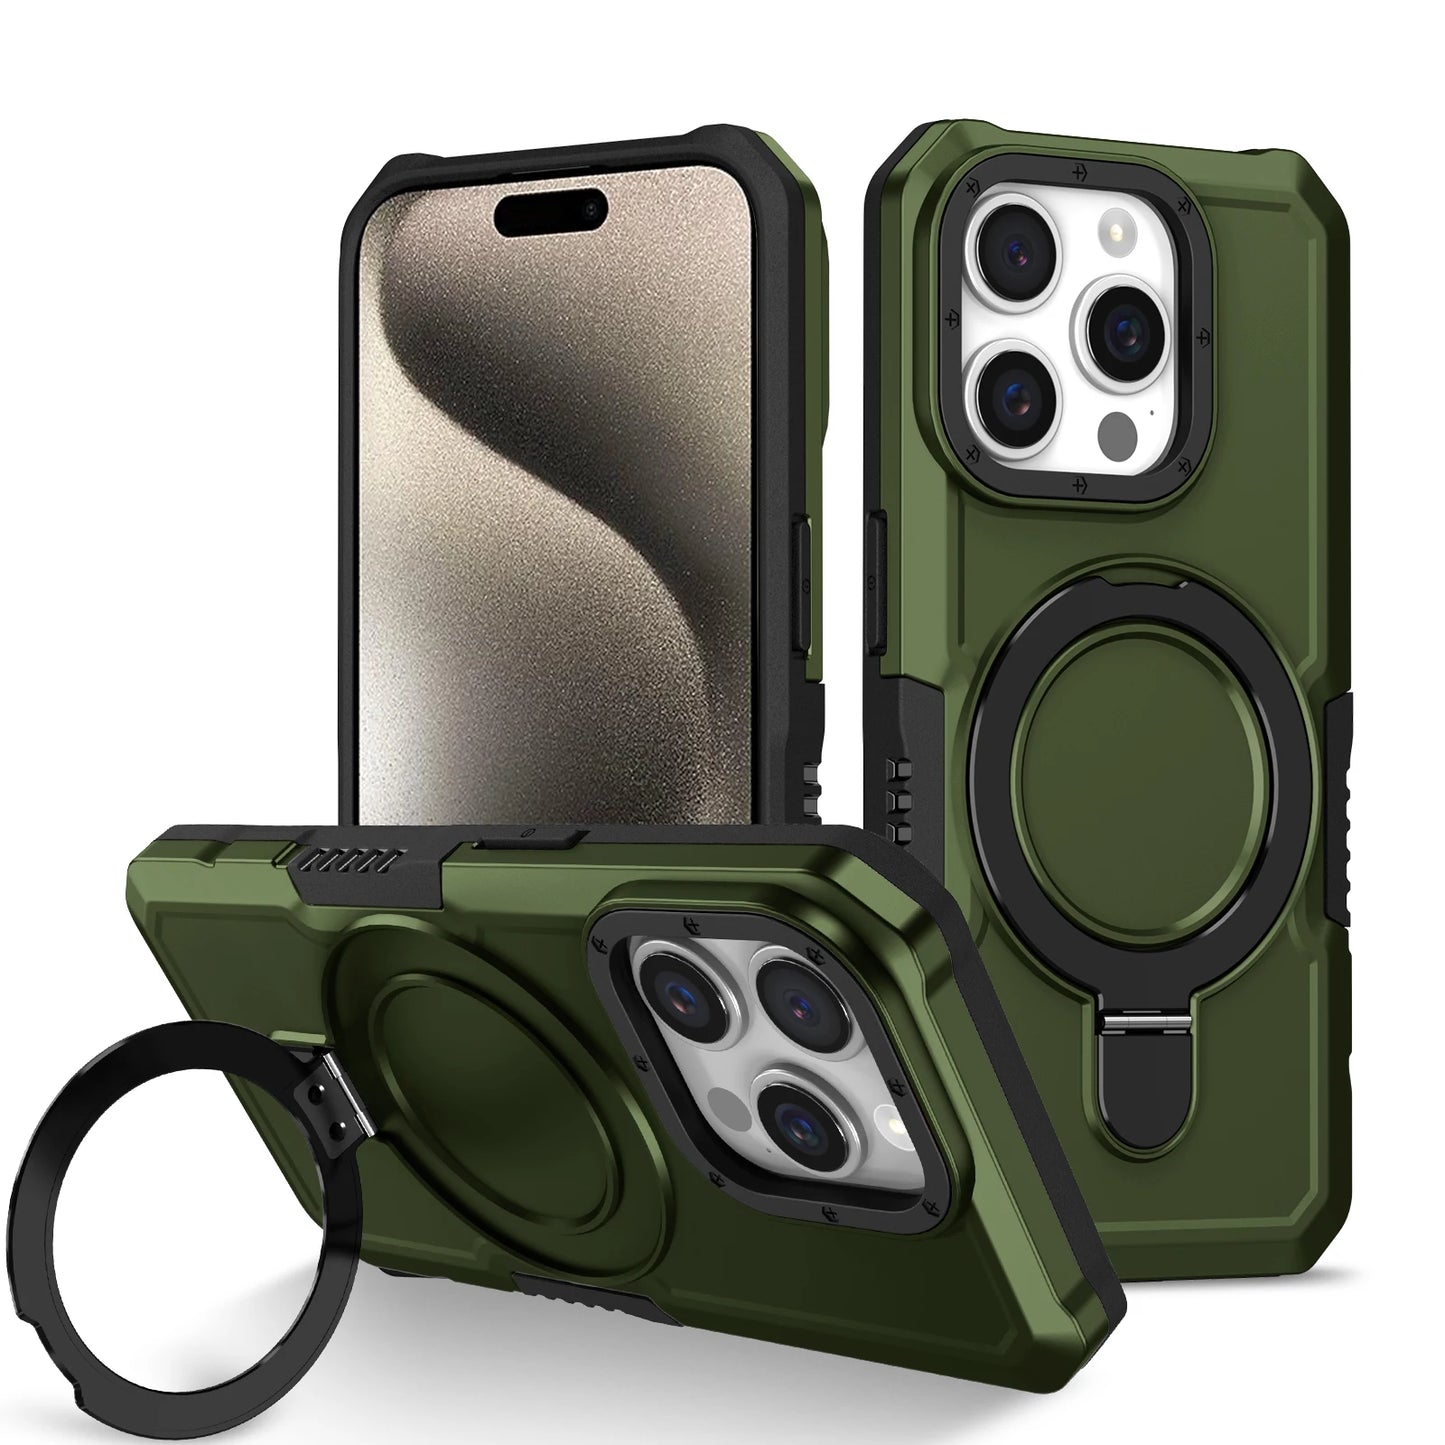 Rugged Armor Drop Tested case with Swivel Stand